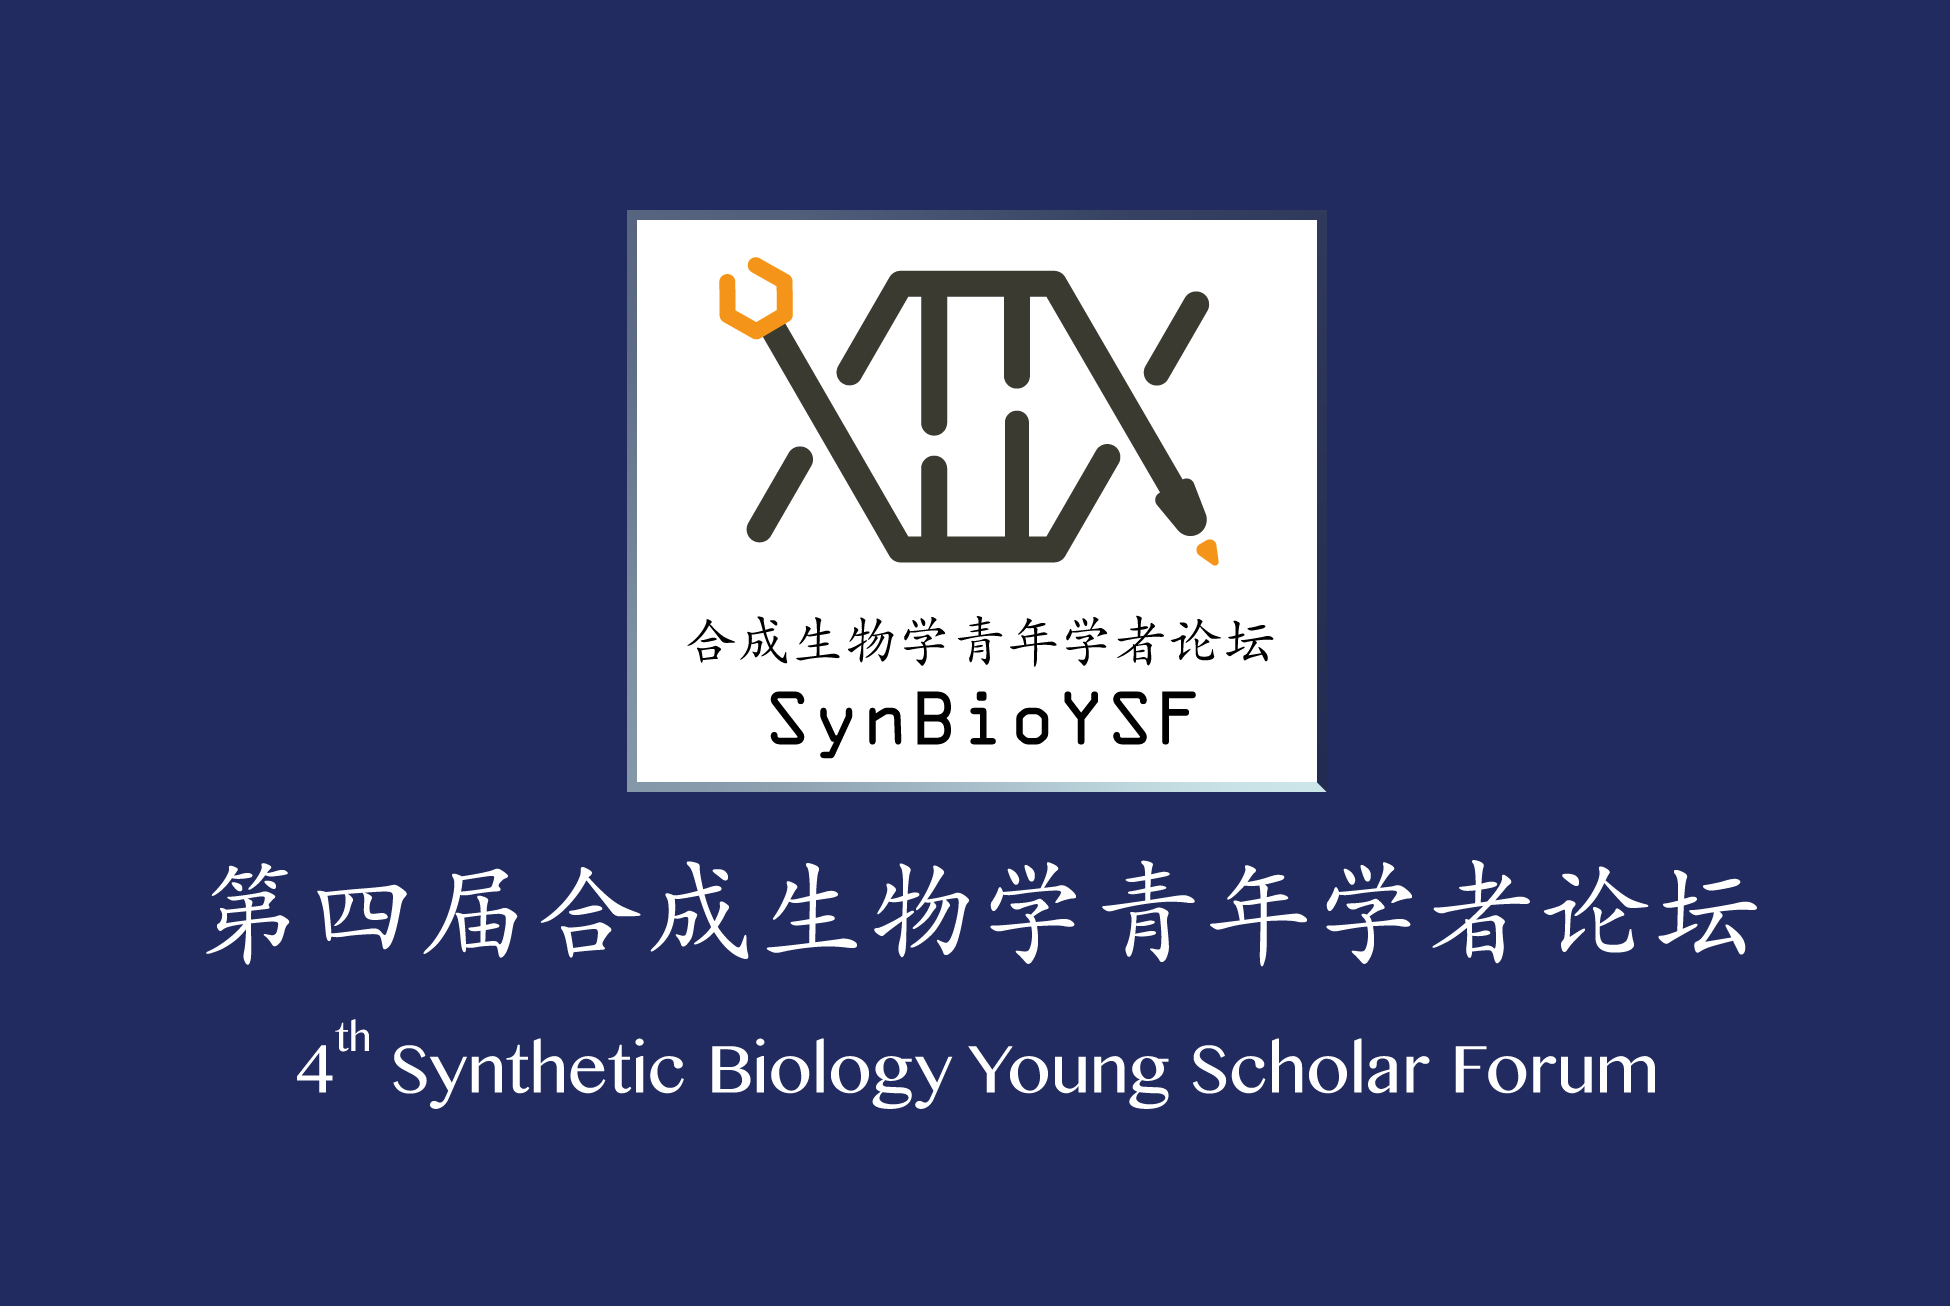 The Forth Synthetic Biology Young Scholar Forum (2018· Shenzhen)